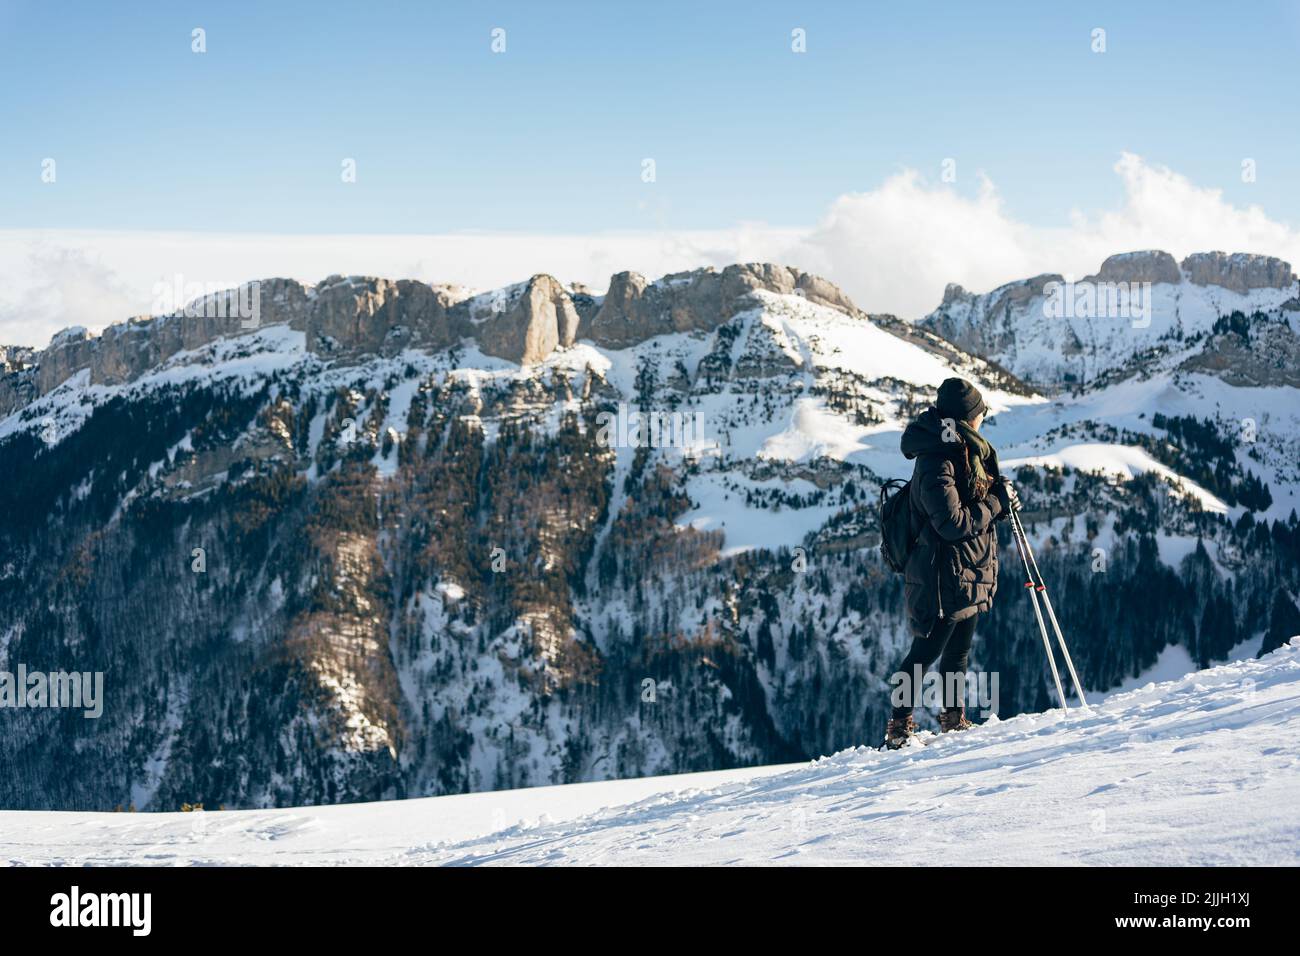 A girl on skis looking at the snow capped mountains in front of her in Switzerland Stock Photo